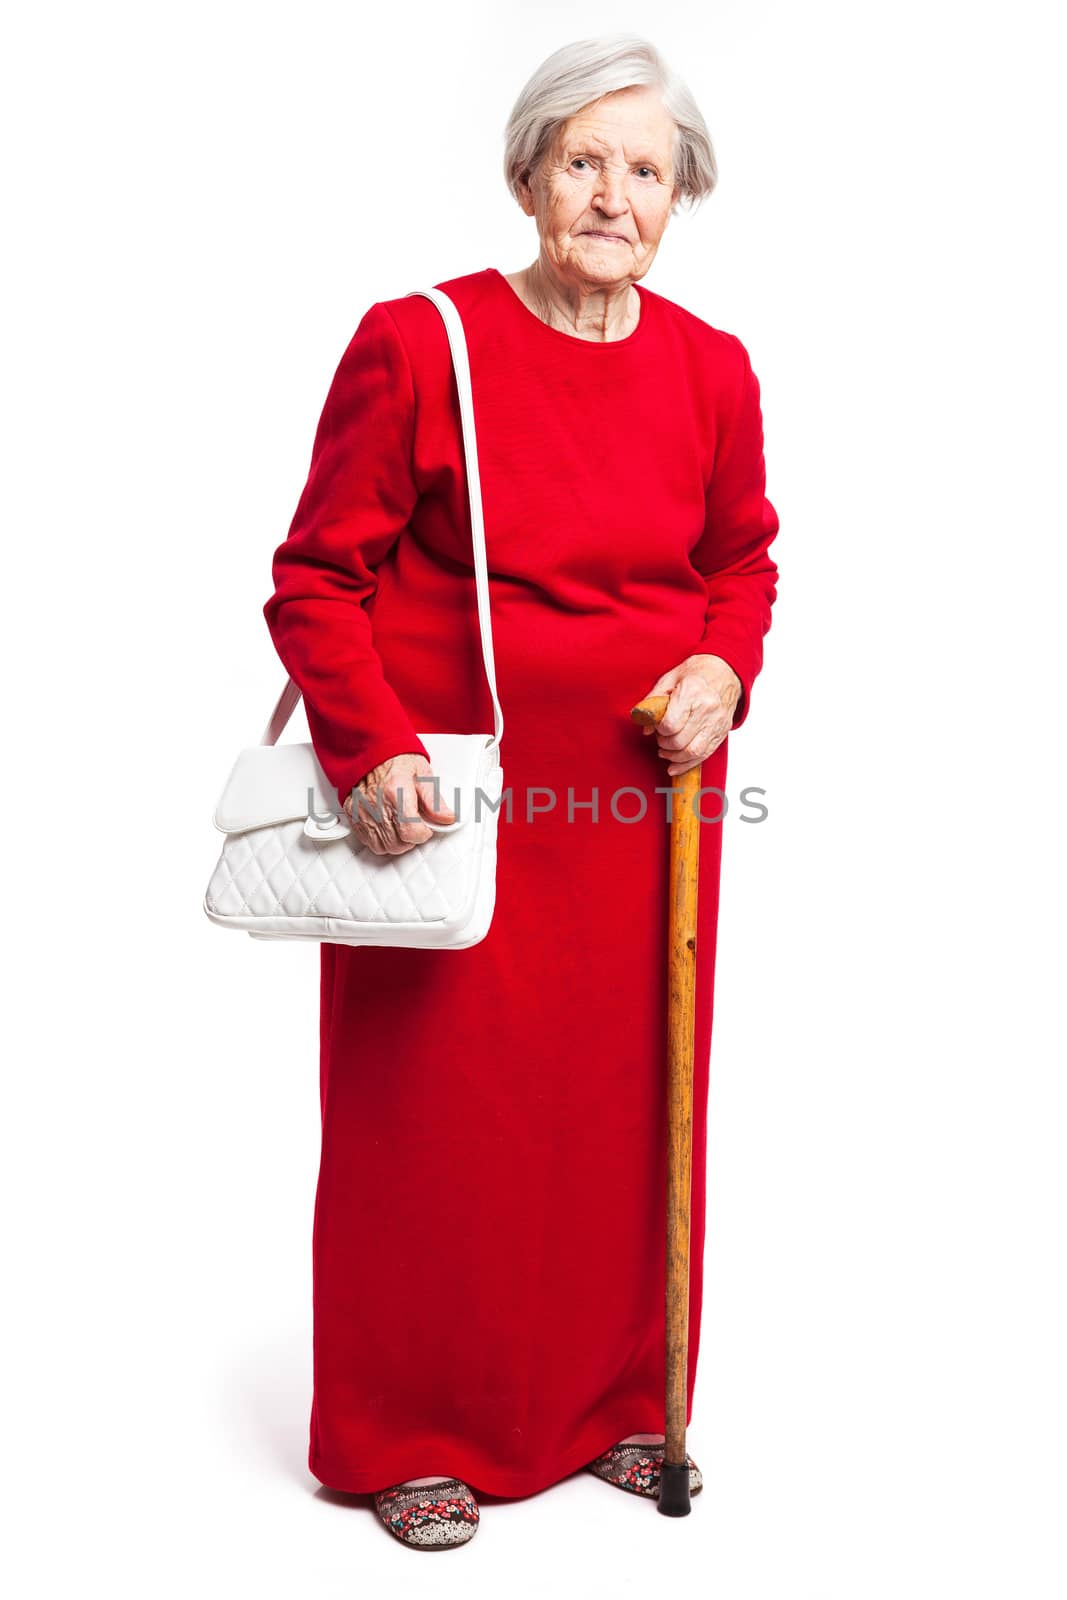 Senior woman with walking stick standing on white by photobac